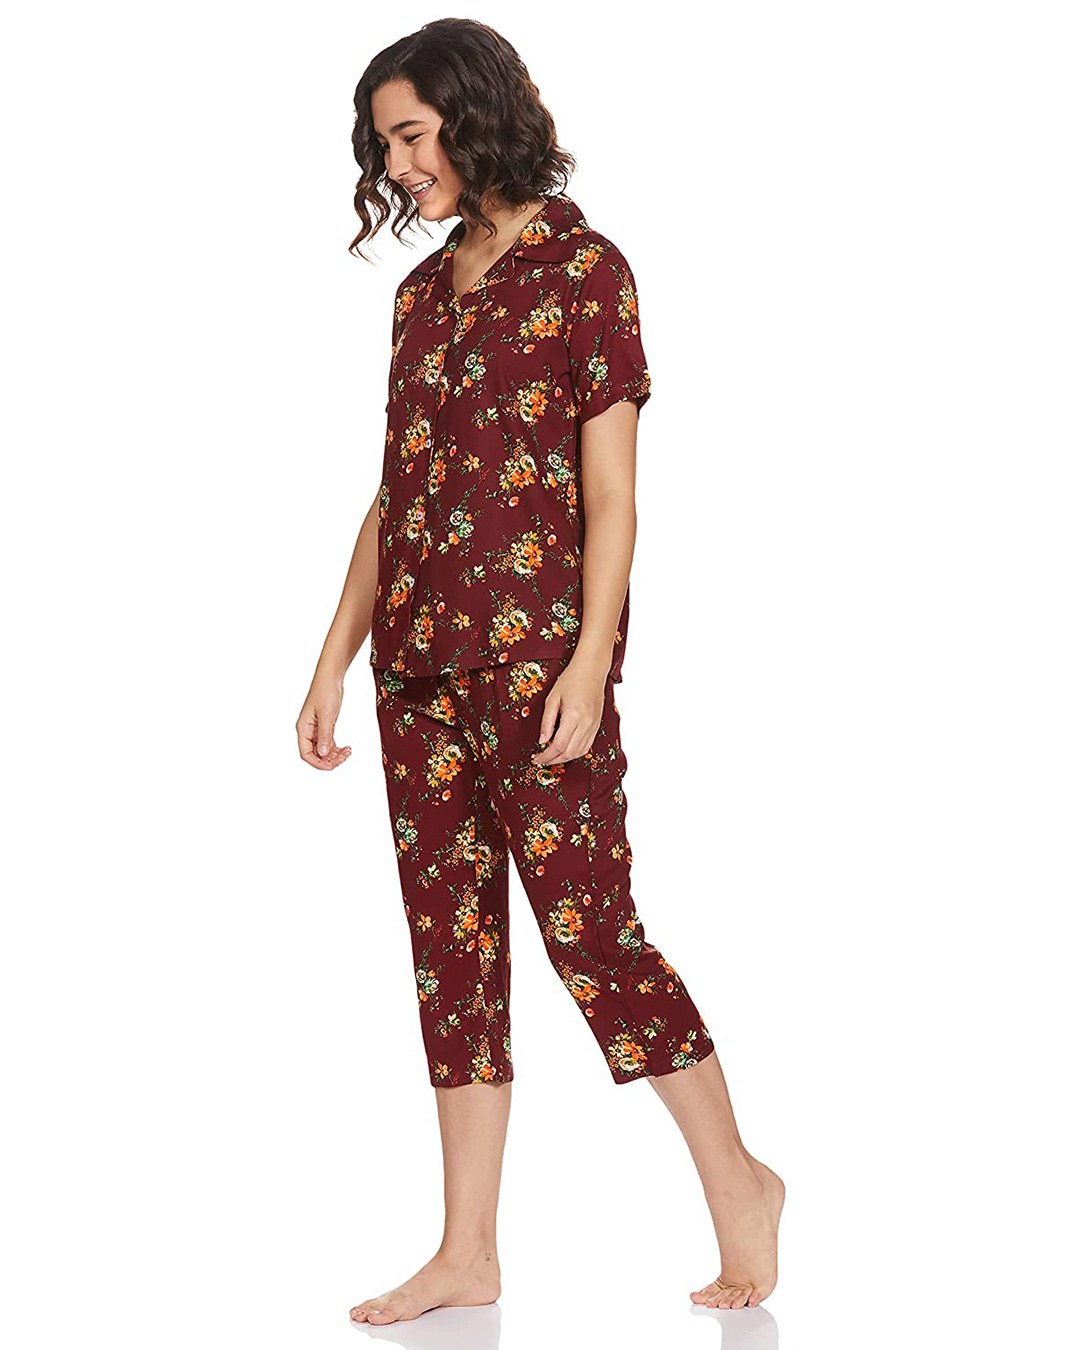 Shop Women's Maroon All Over Floral Printed Nightsuit-Back